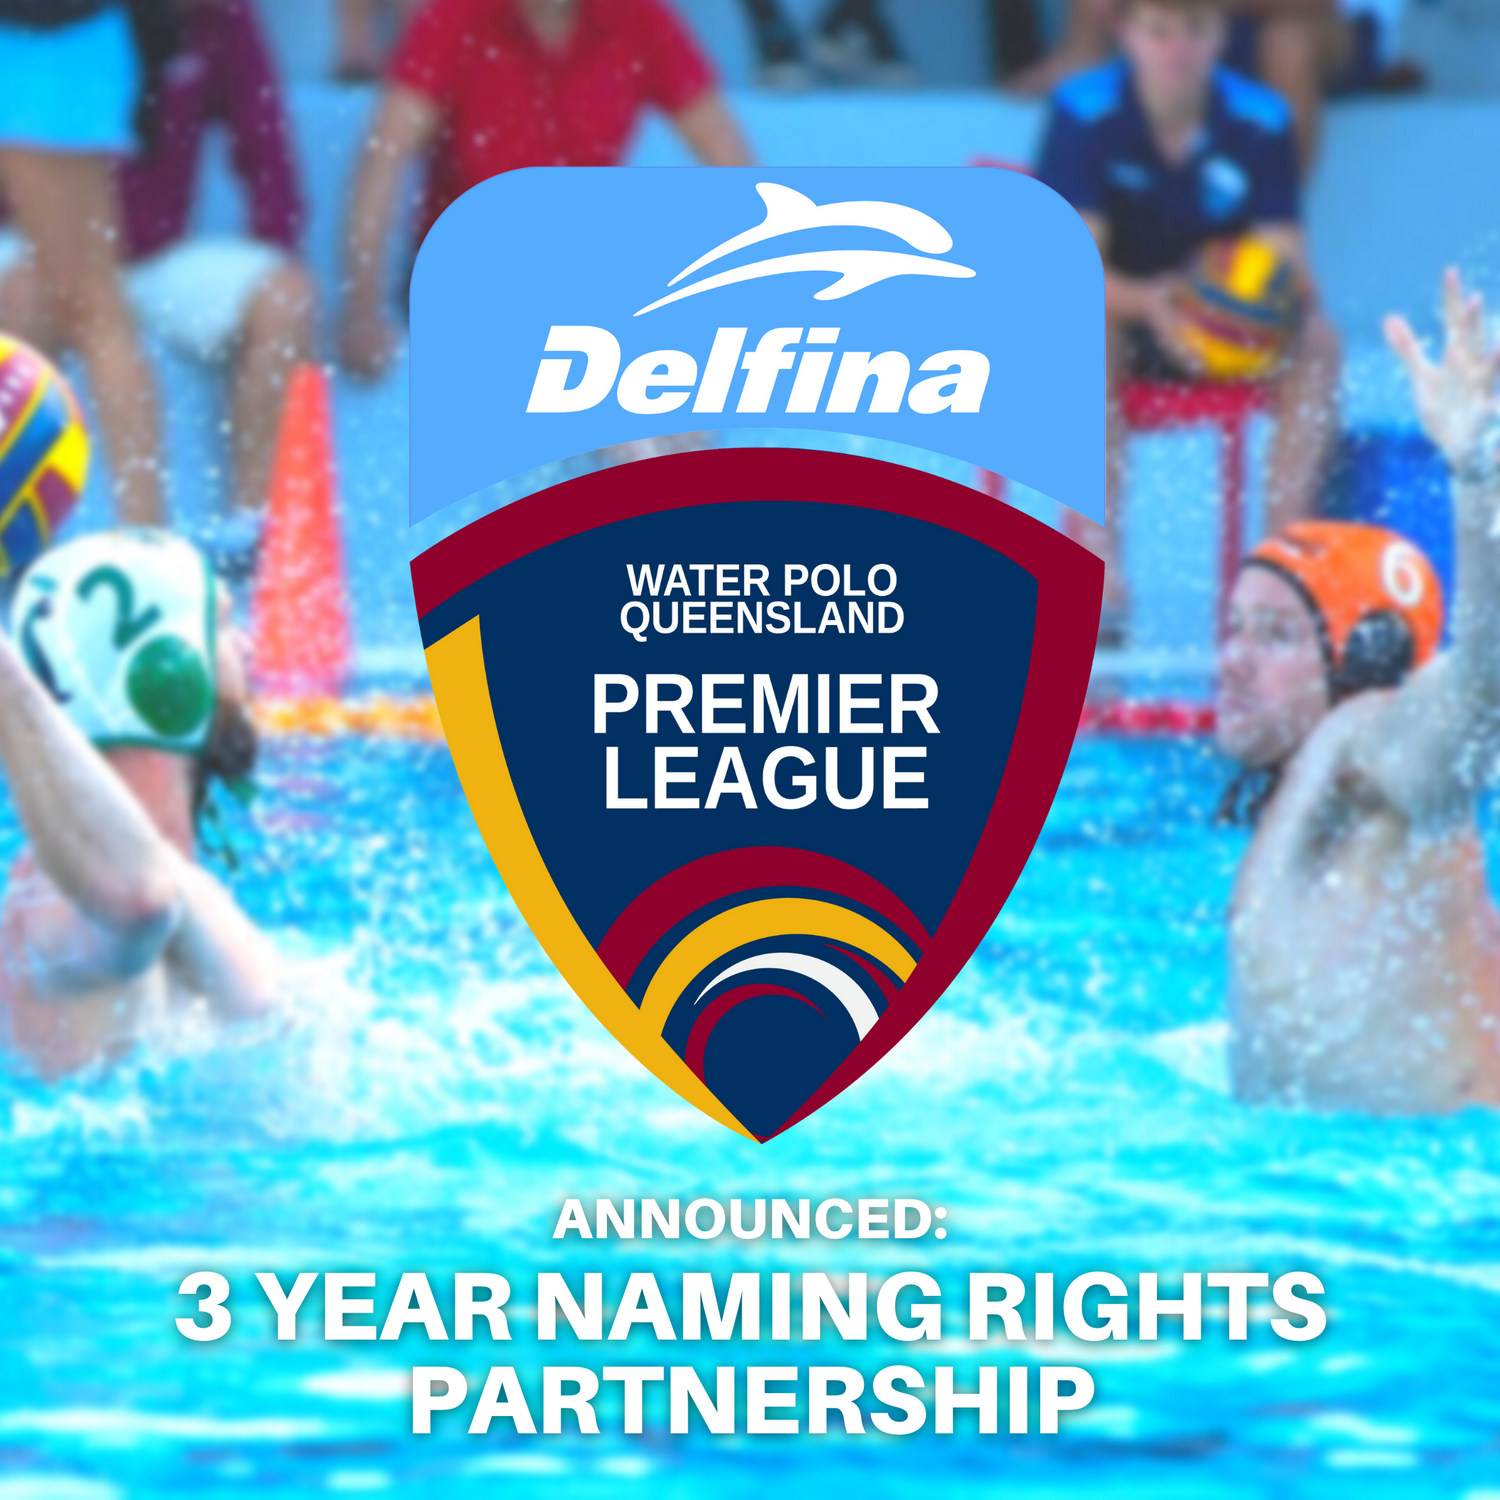 DELFINA SPORT NAMING RIGHTS PARTNER OF THE WATER POLO QUEENSLAND PREMIER LEAGUE